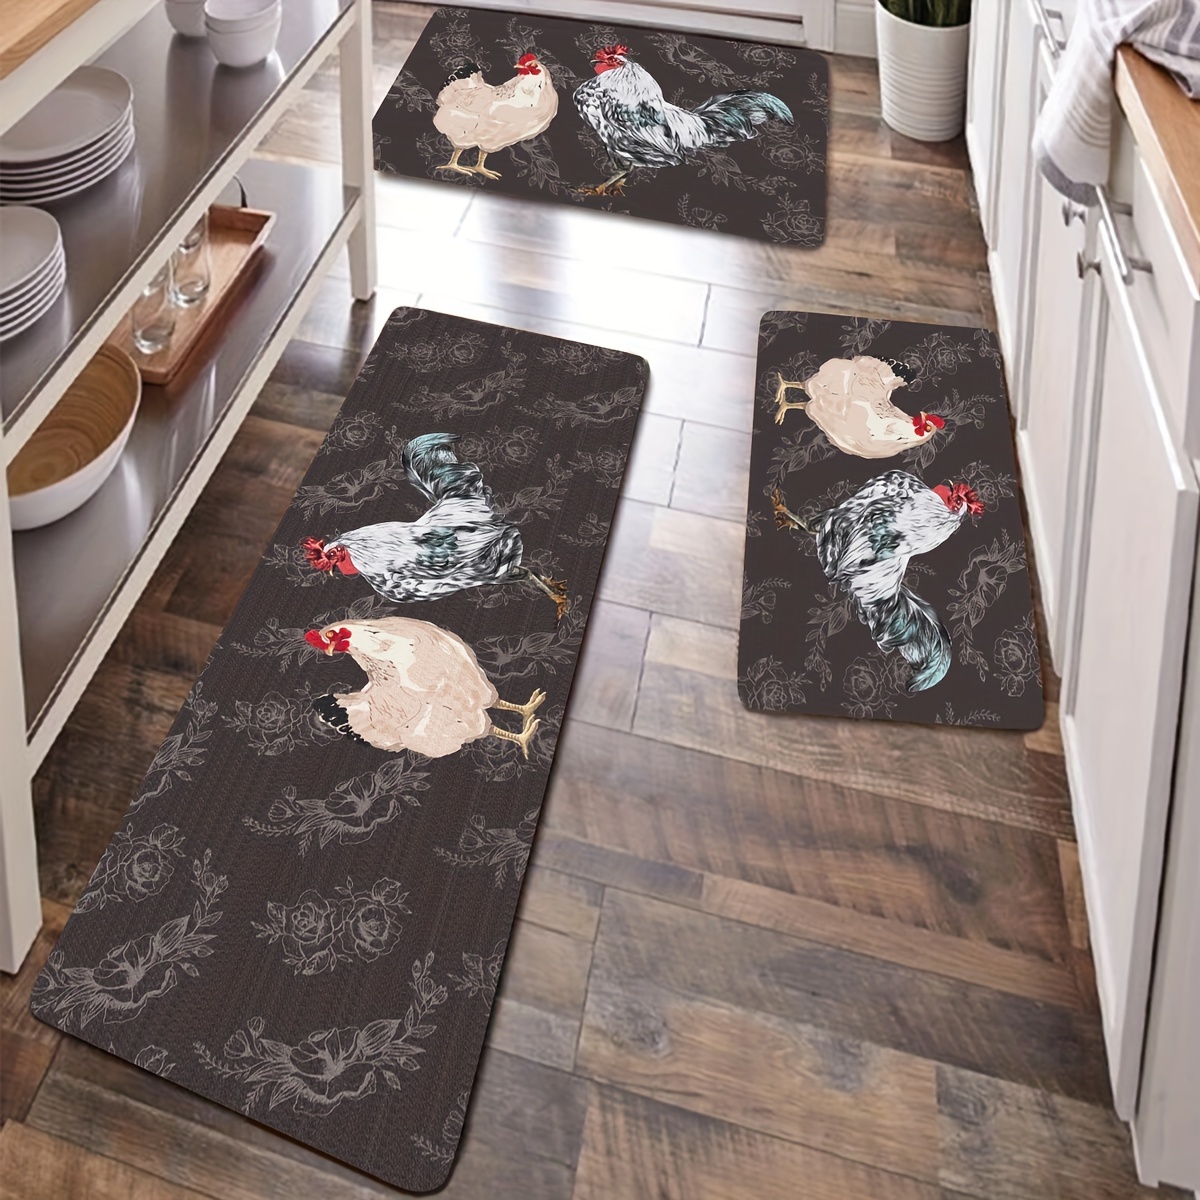 Cushioned Anti-Fatigue Floor Mat,Waterproof Non-Skid Kitchen Mats and Rugs  Heavy Duty Comfort Standing Mat for Kitchen, Home, Office, Sink, Laundry